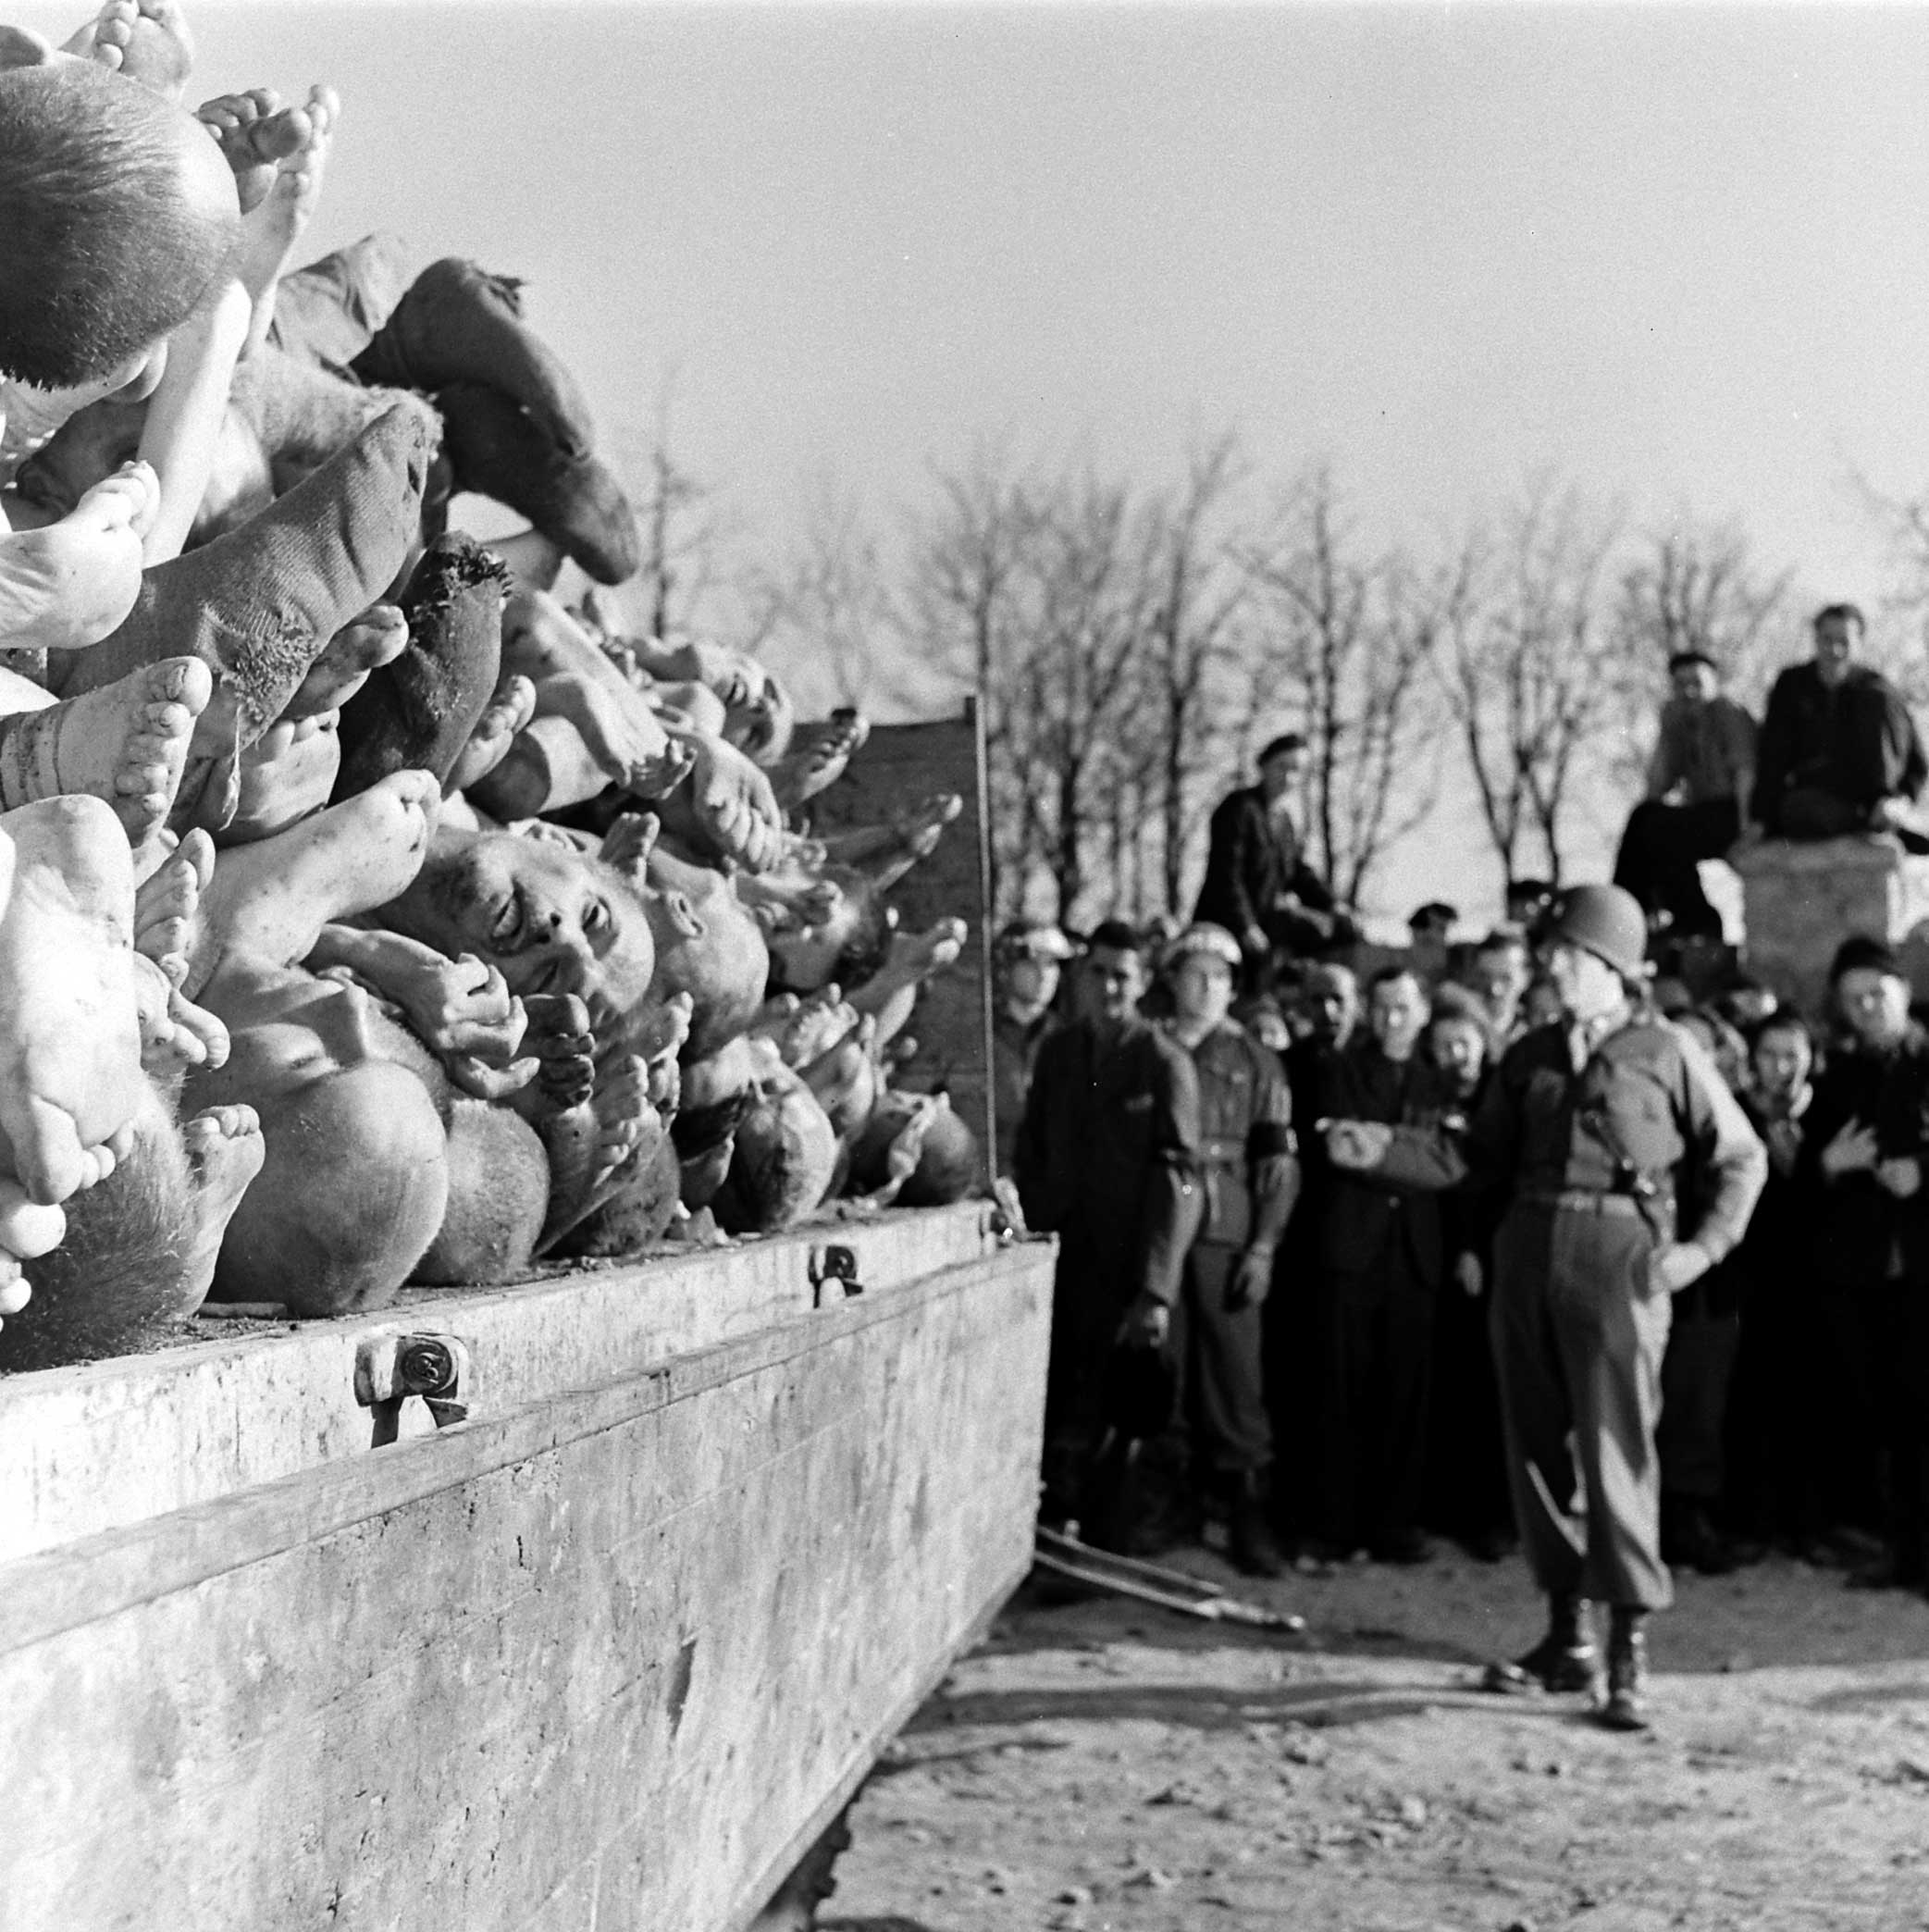 Not published in LIFE. The dead at Buchenwald, April 1945.